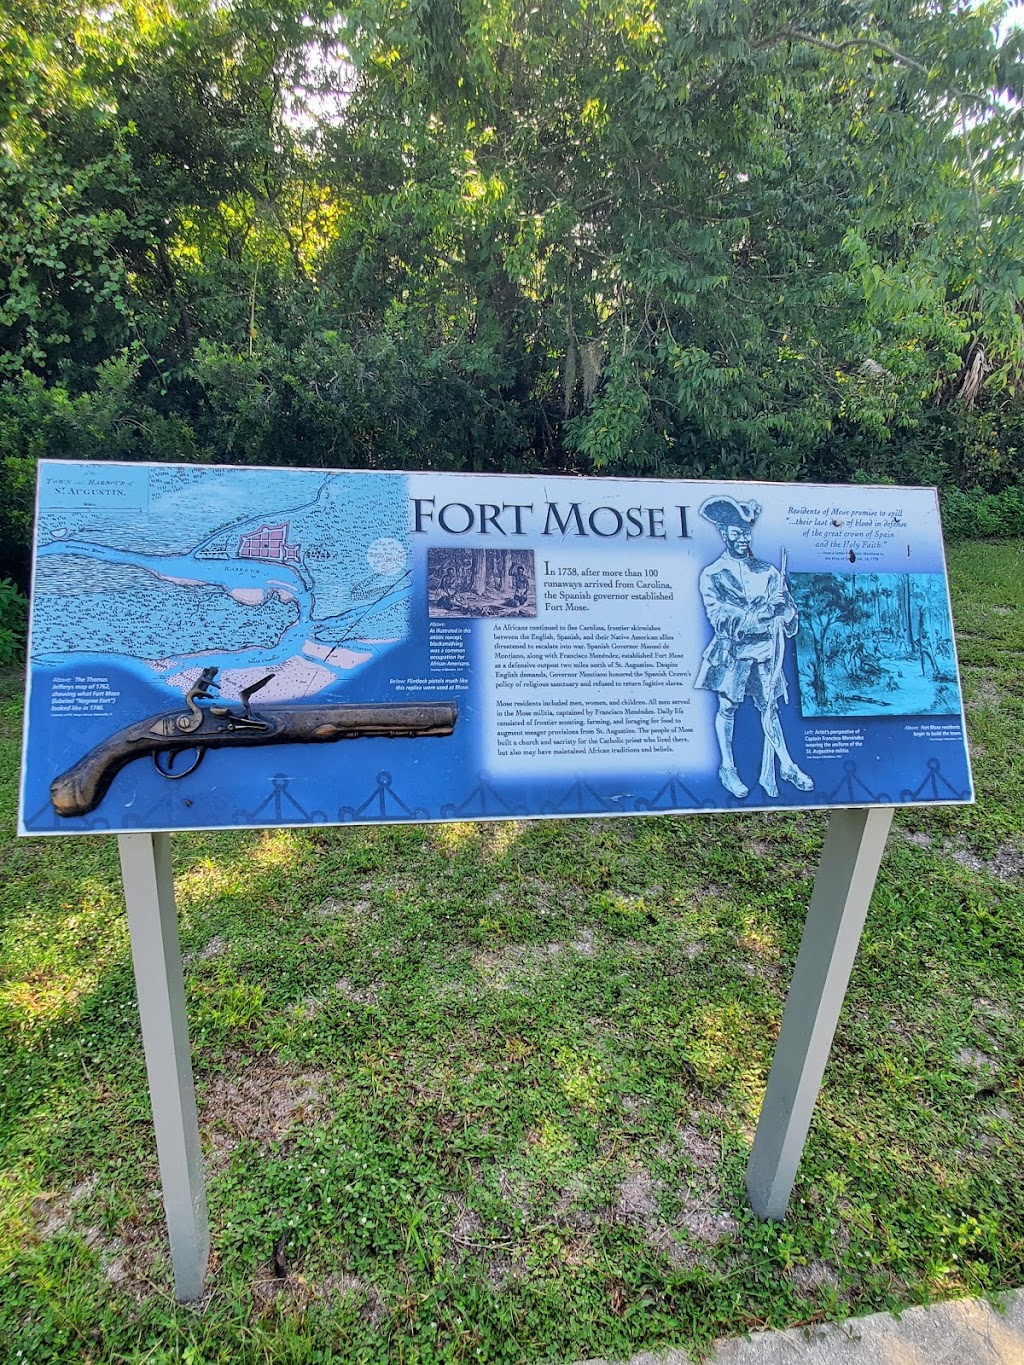 Fort Mose Historic State Park | 15 Fort Mose Trail, St. Augustine, FL 32084 | Phone: (904) 823-2232